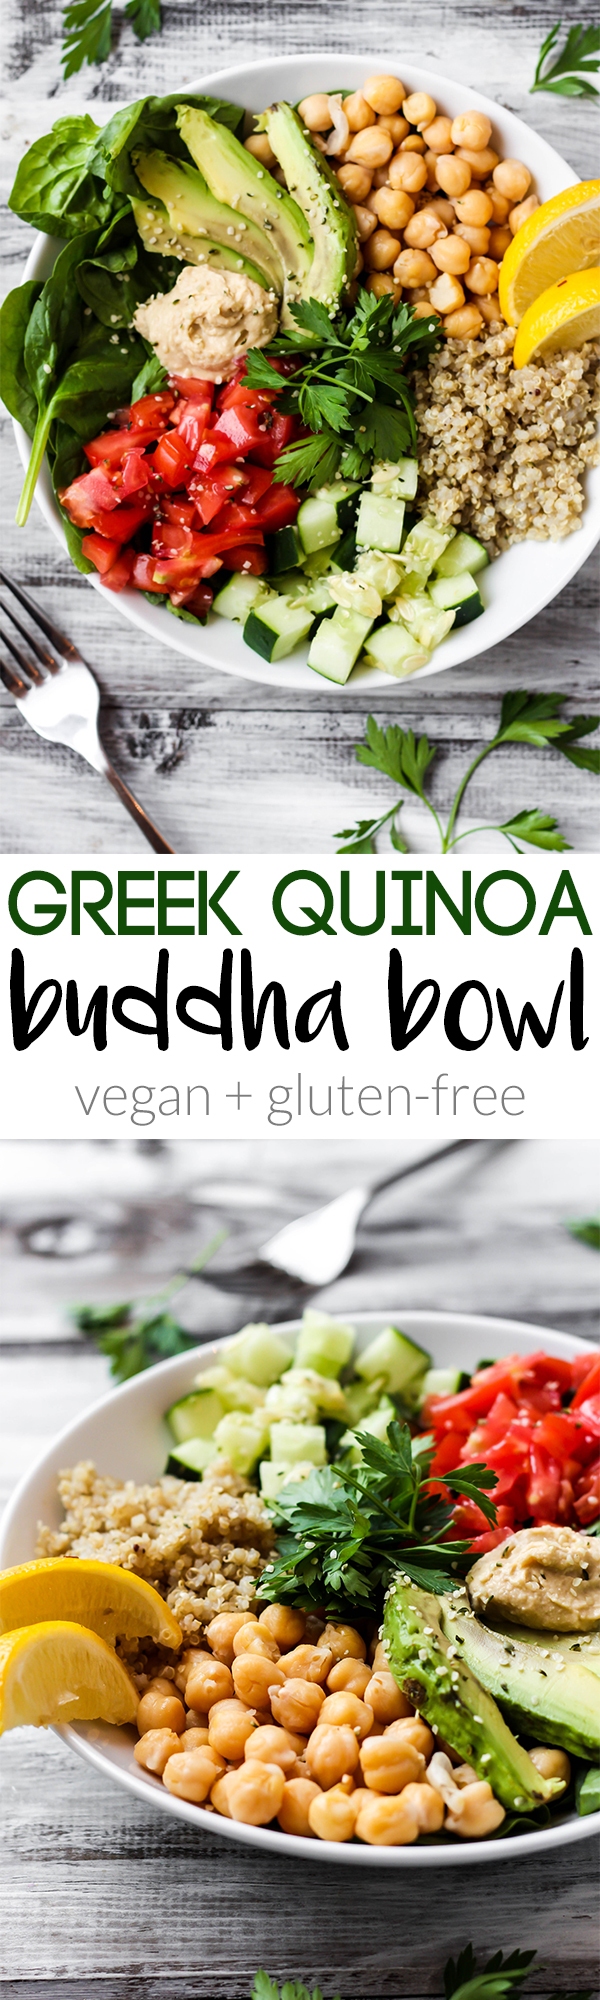 Full of greens and beans, this Greek Quinoa Buddha Bowl is the ultimate healthy lunch or dinner. It's ready in 20 minutes and packed with fresh flavors!